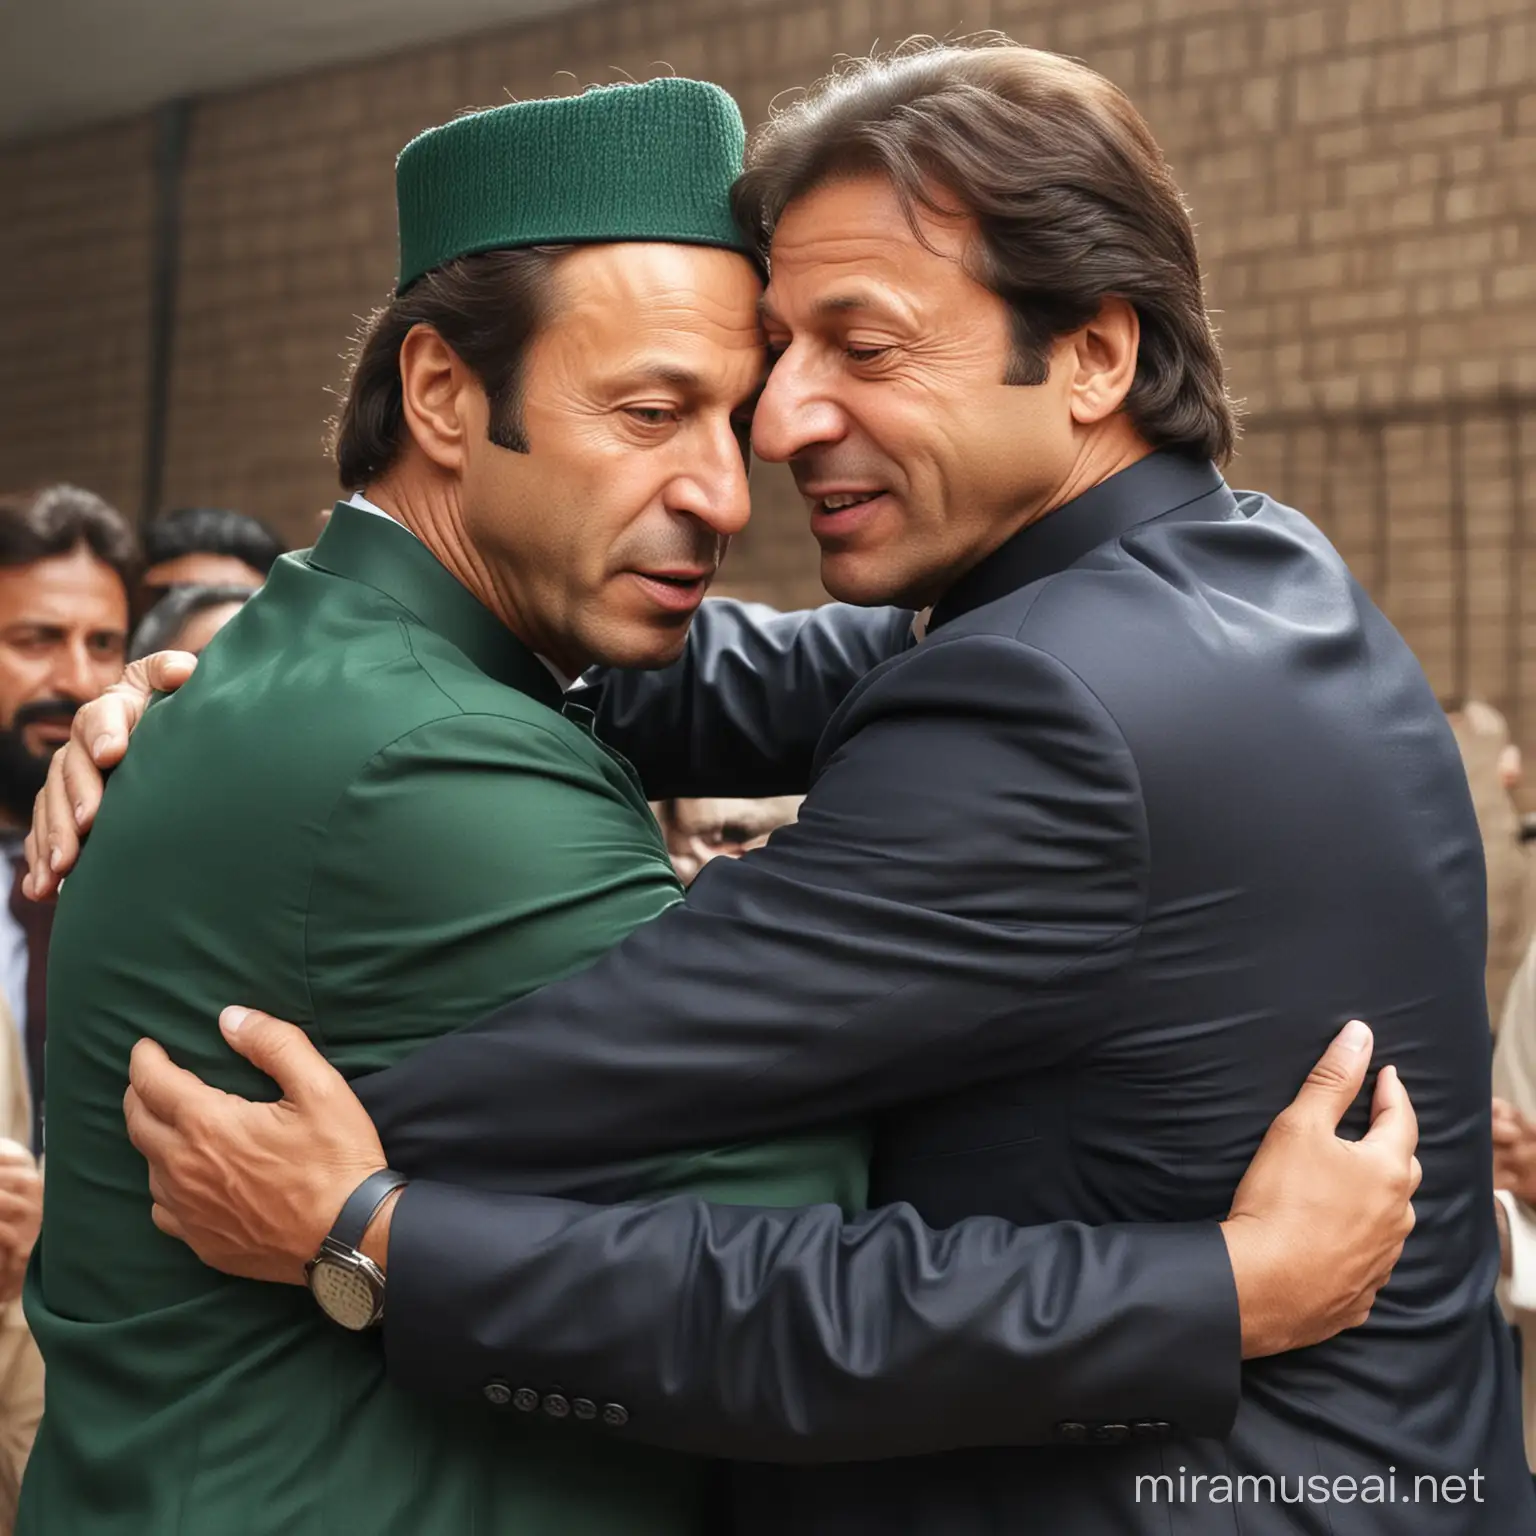 Realistic image of imran khan and nawaz shareef hugging each other